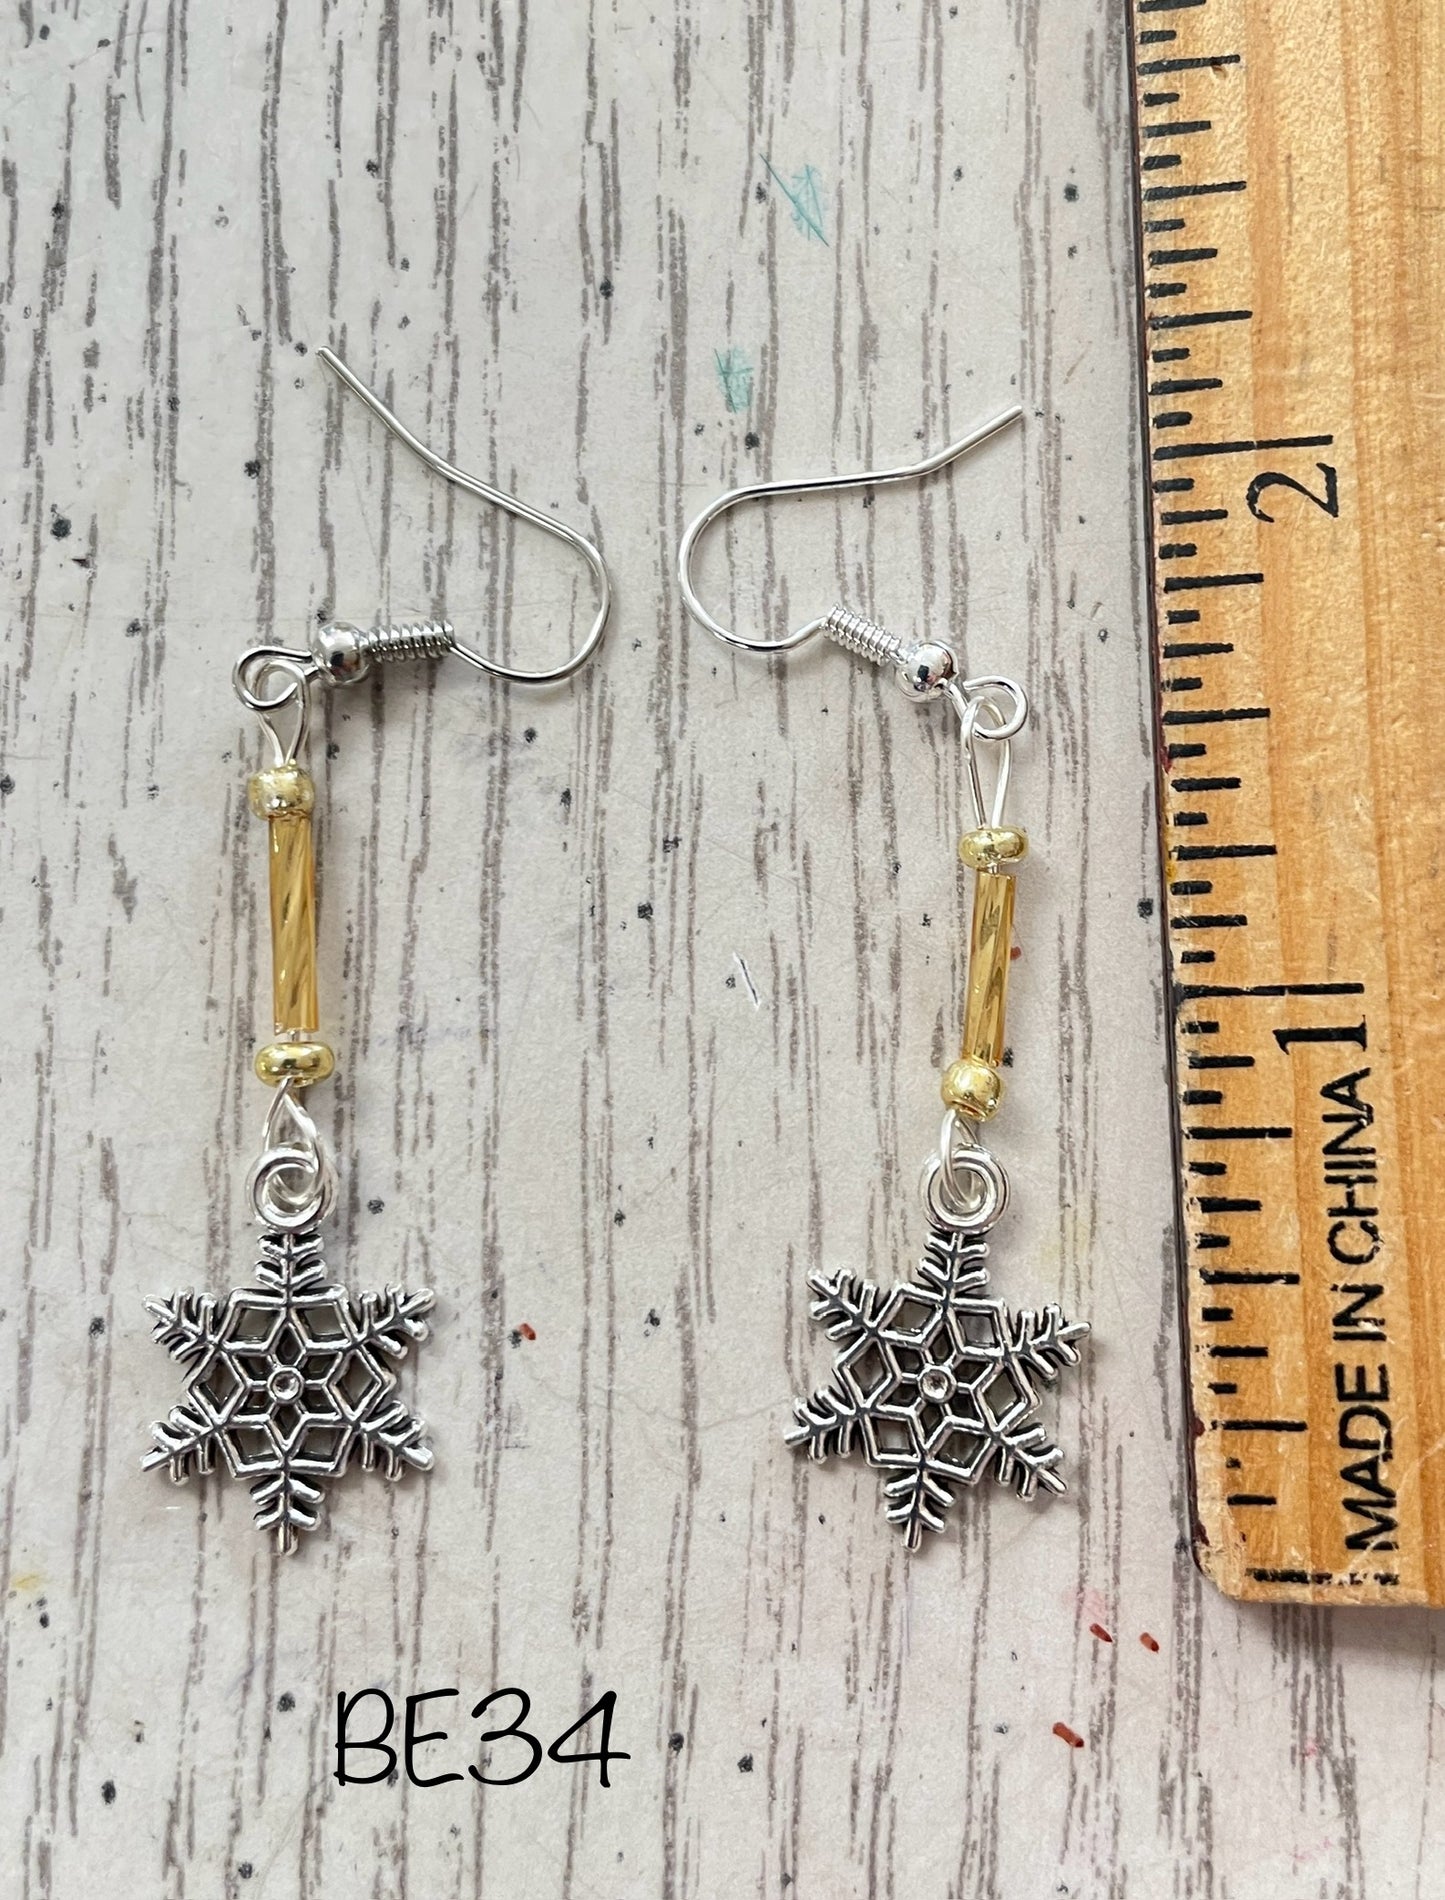 Snowflake Earrings with gold accent beads